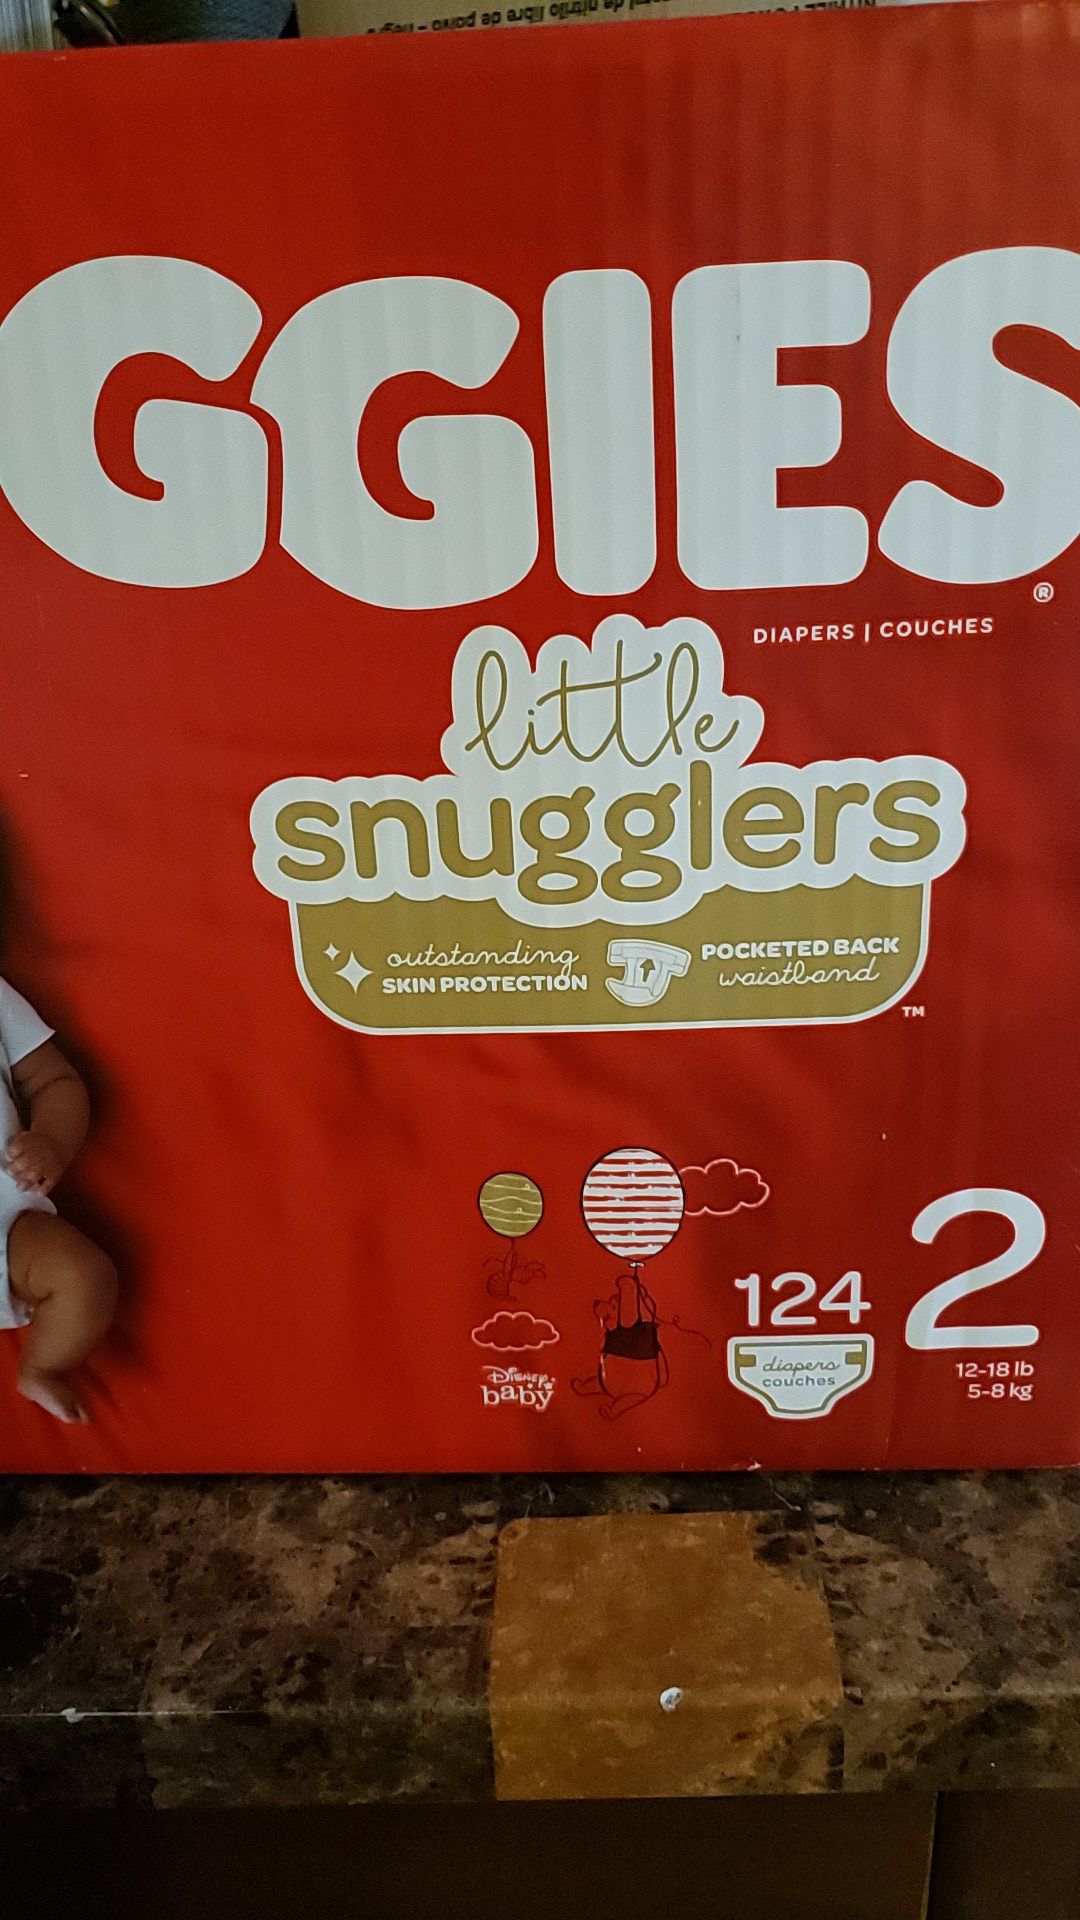 Free diapers, size 2